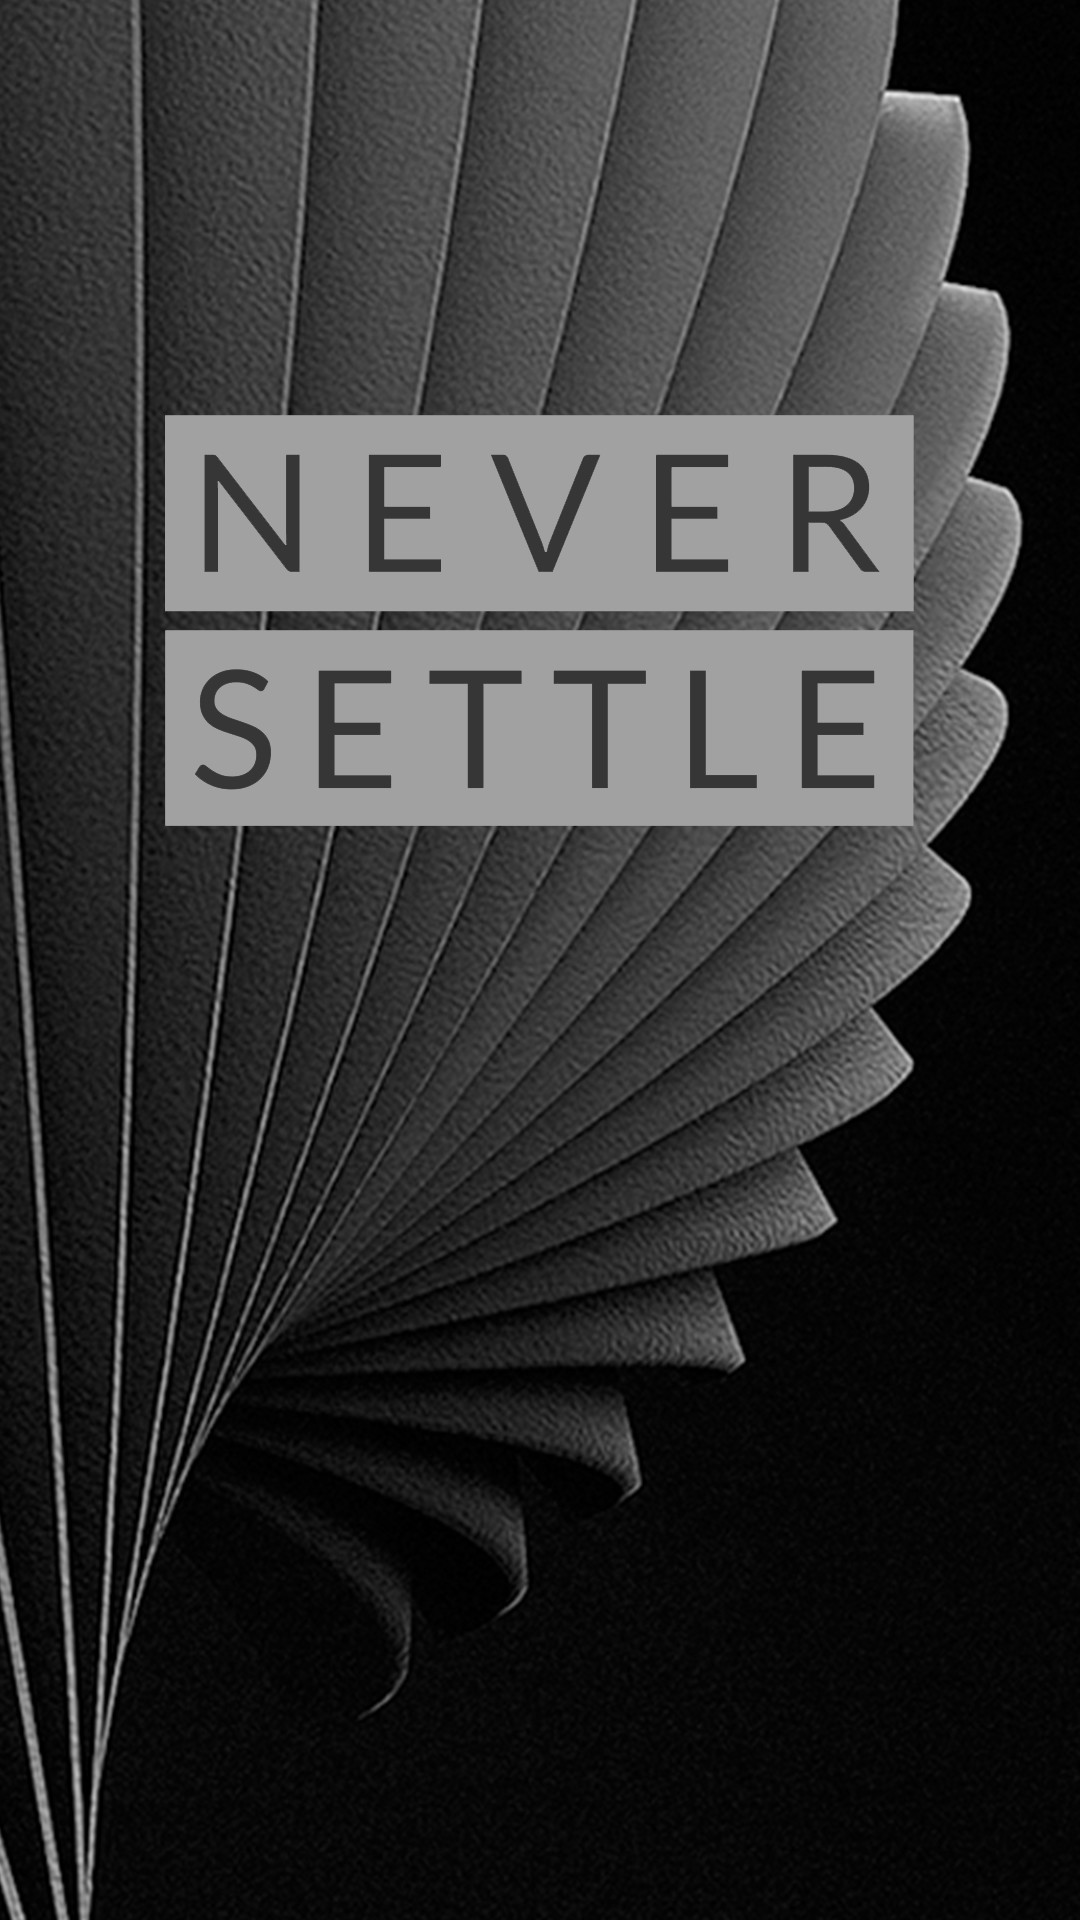 1080x1920 Never Settle Wallpaper? Where is it? - OnePlus Forums